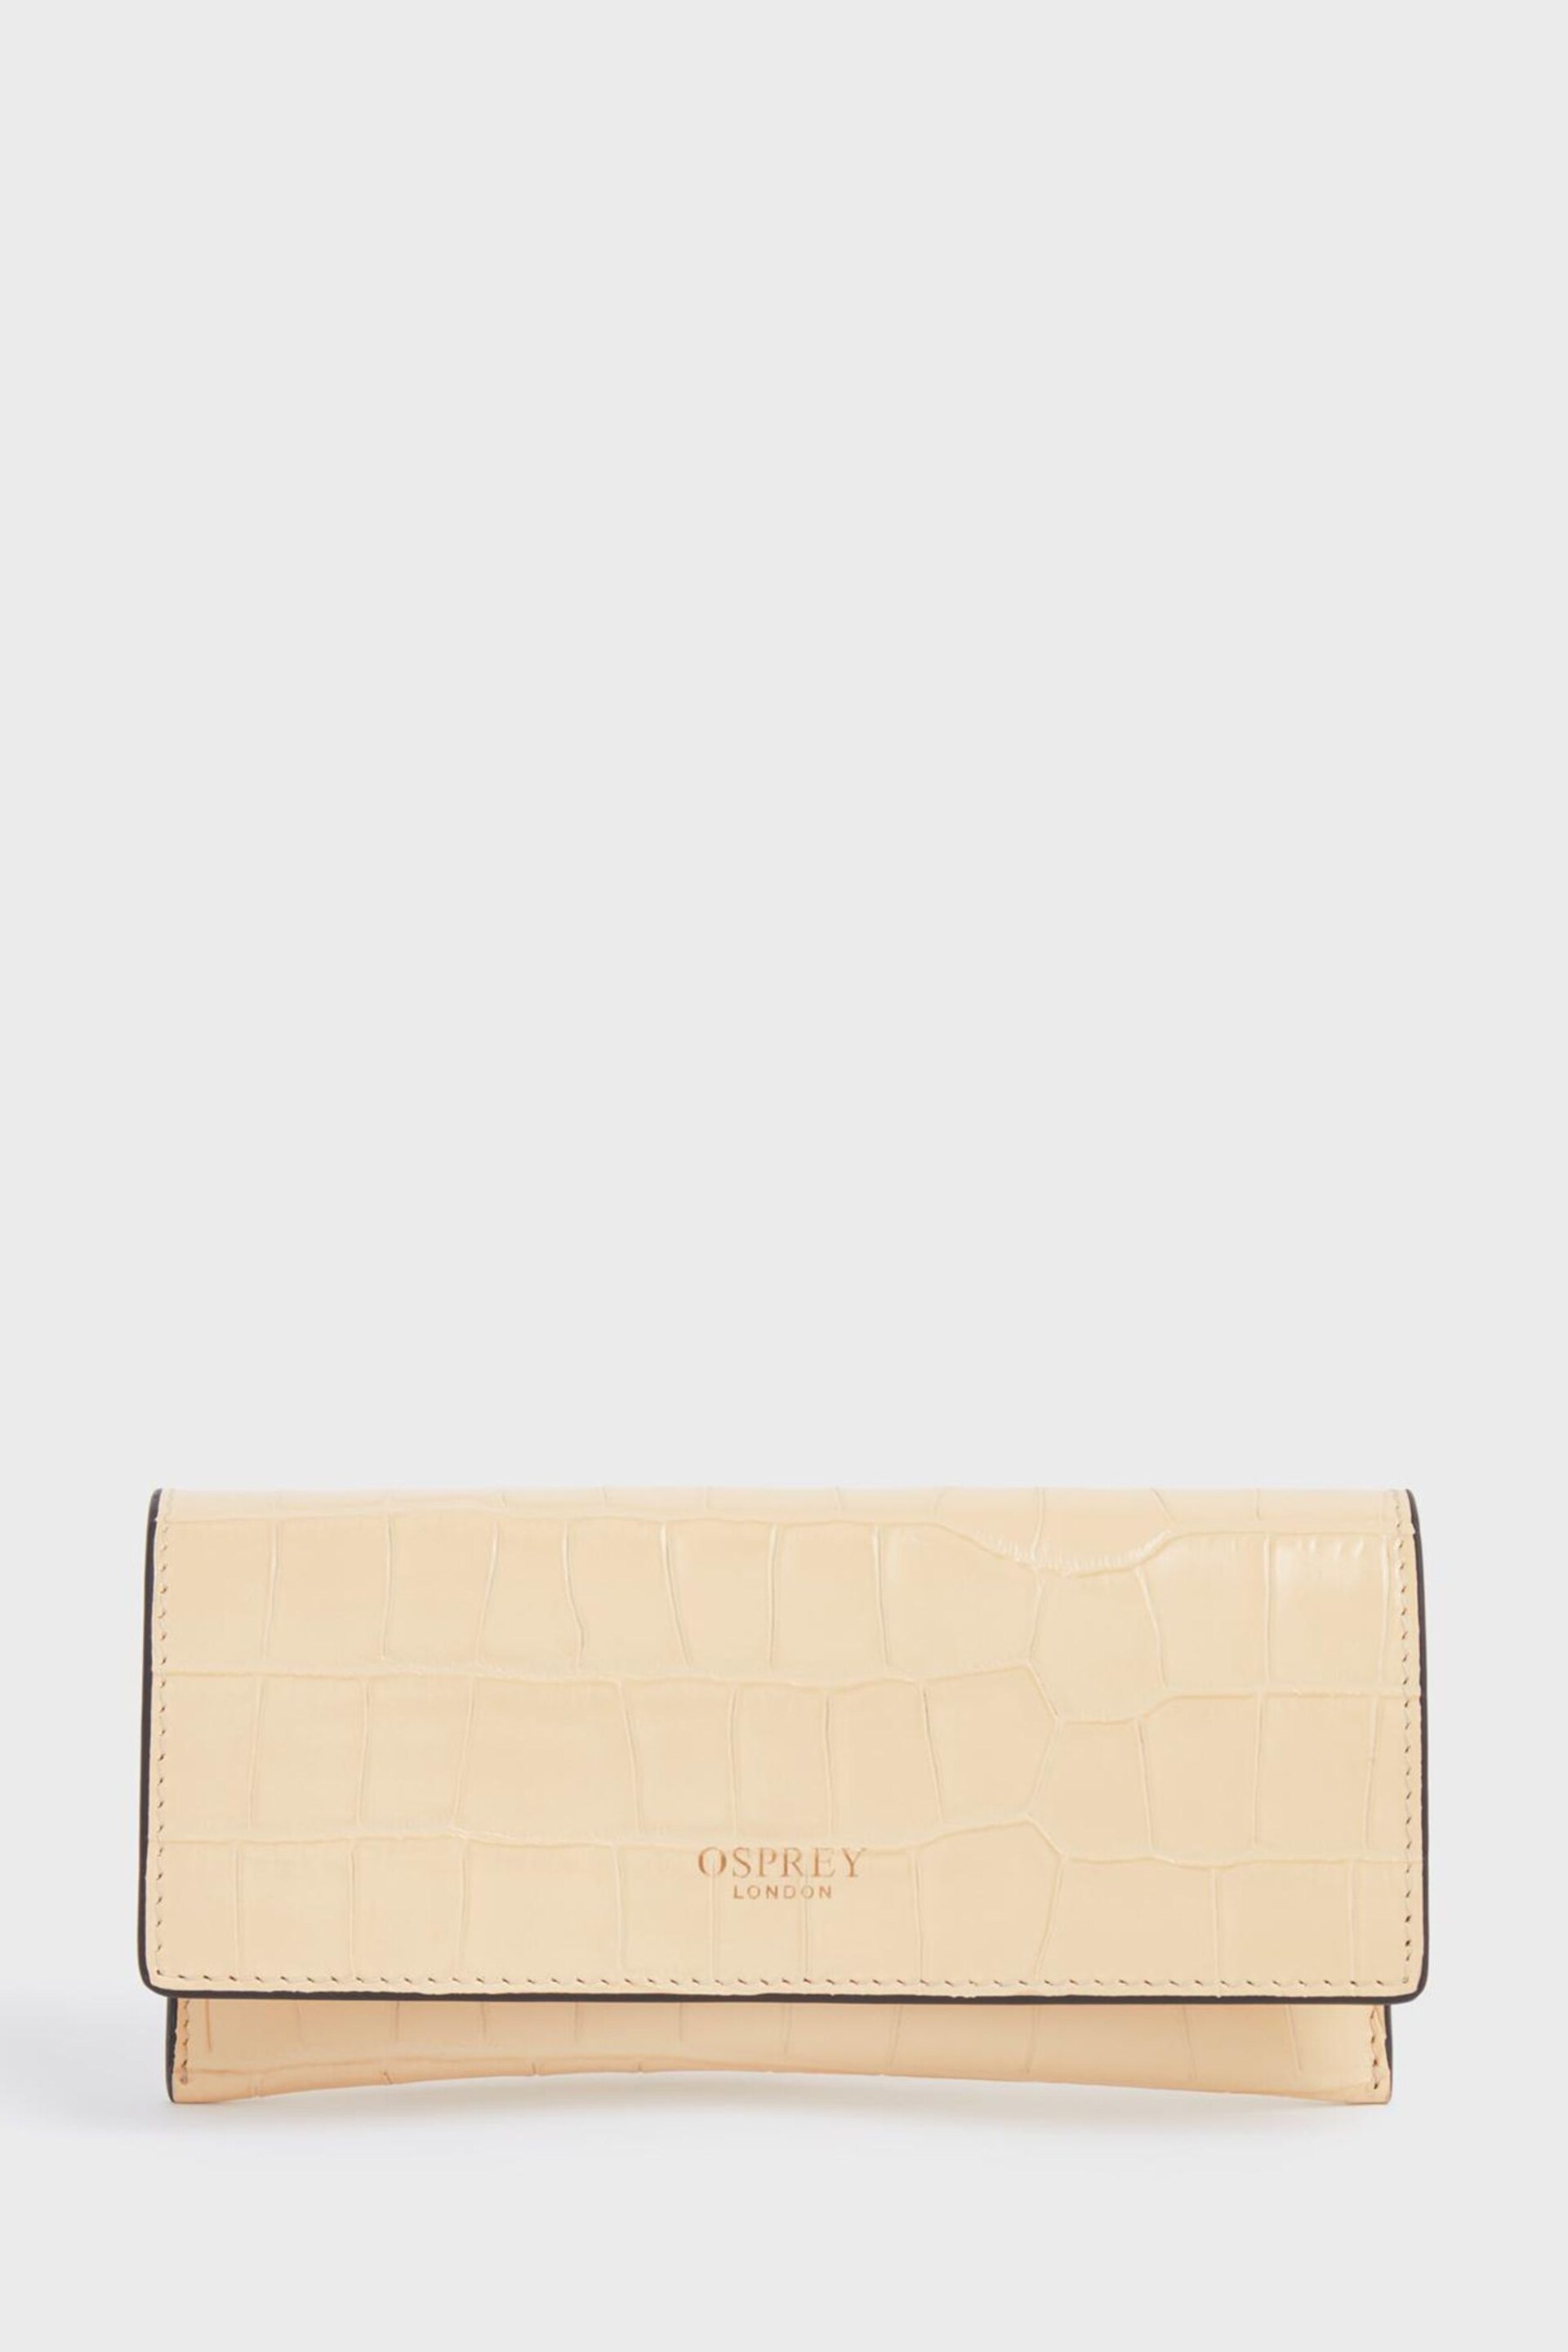 Osprey London Natural The Ludlow Leather Glasses Case - Image 1 of 3